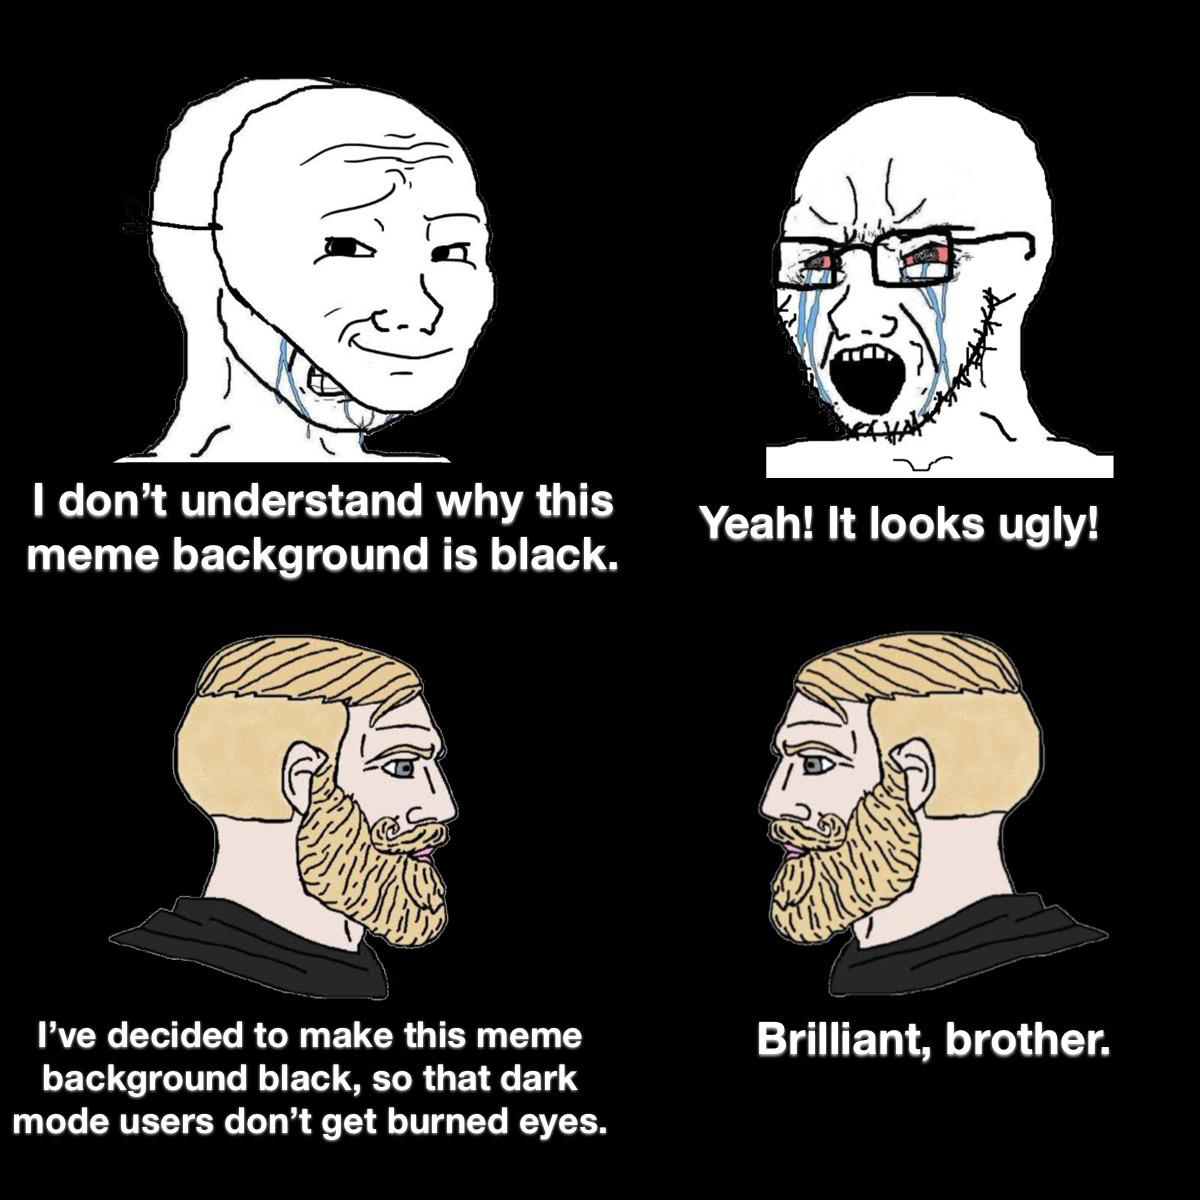 funny memes and pics - cartoon - I don't understand why this meme background is black. I've decided to make this meme background black, so that dark mode users don't get burned eyes. Yeah! It looks ugly! Brilliant, brother.